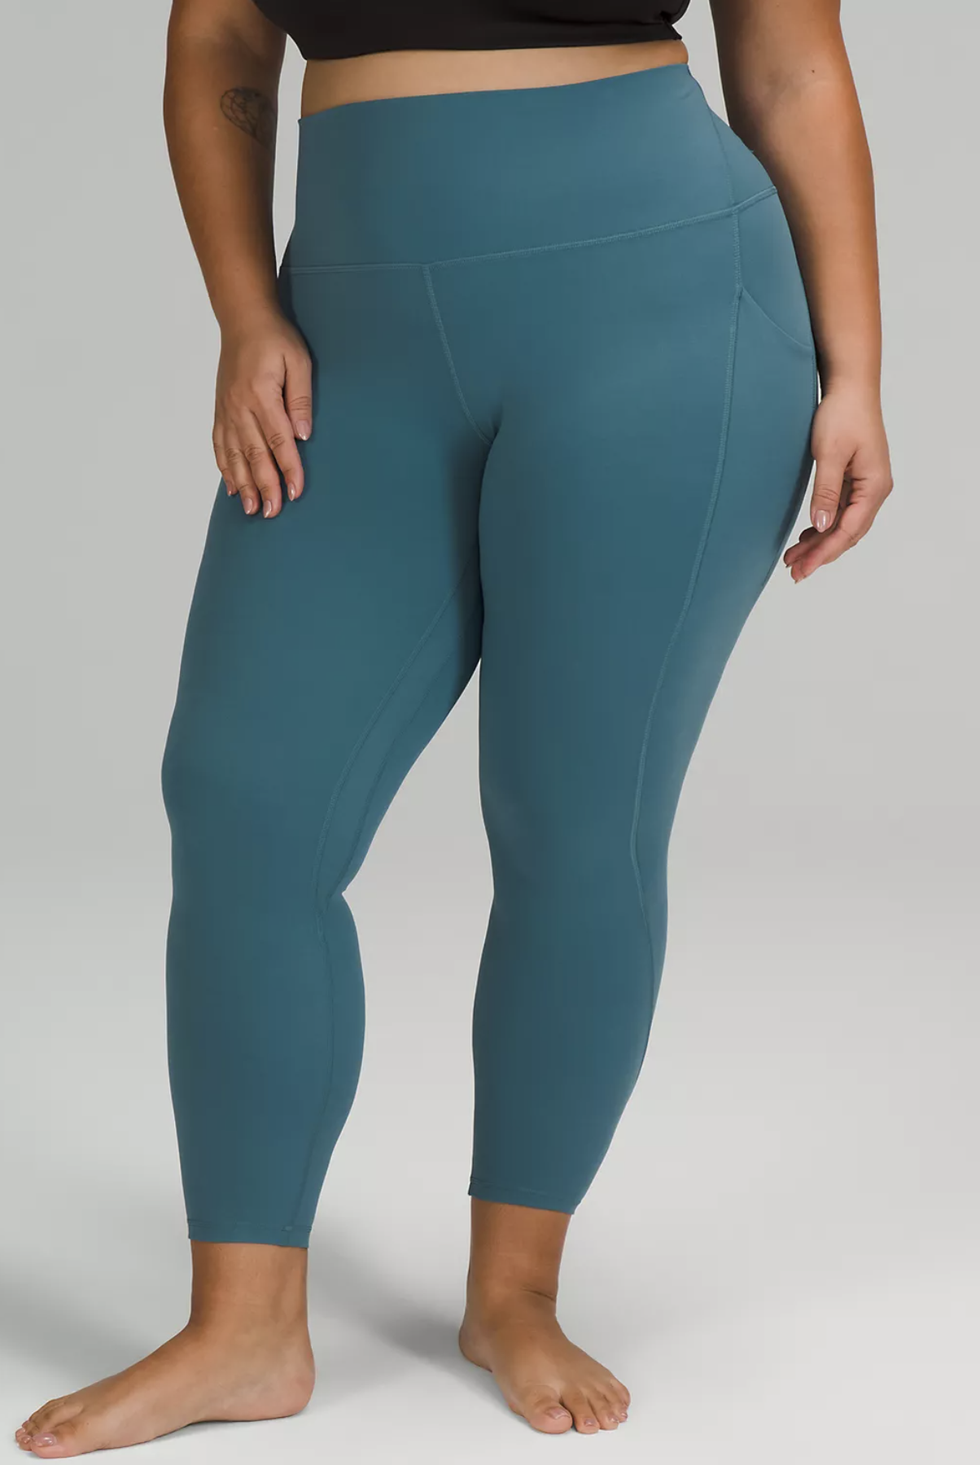 Lululemon Is Having a Major Sale on Some of Its Most Popular Leggings  Starting at Just $39, Parade